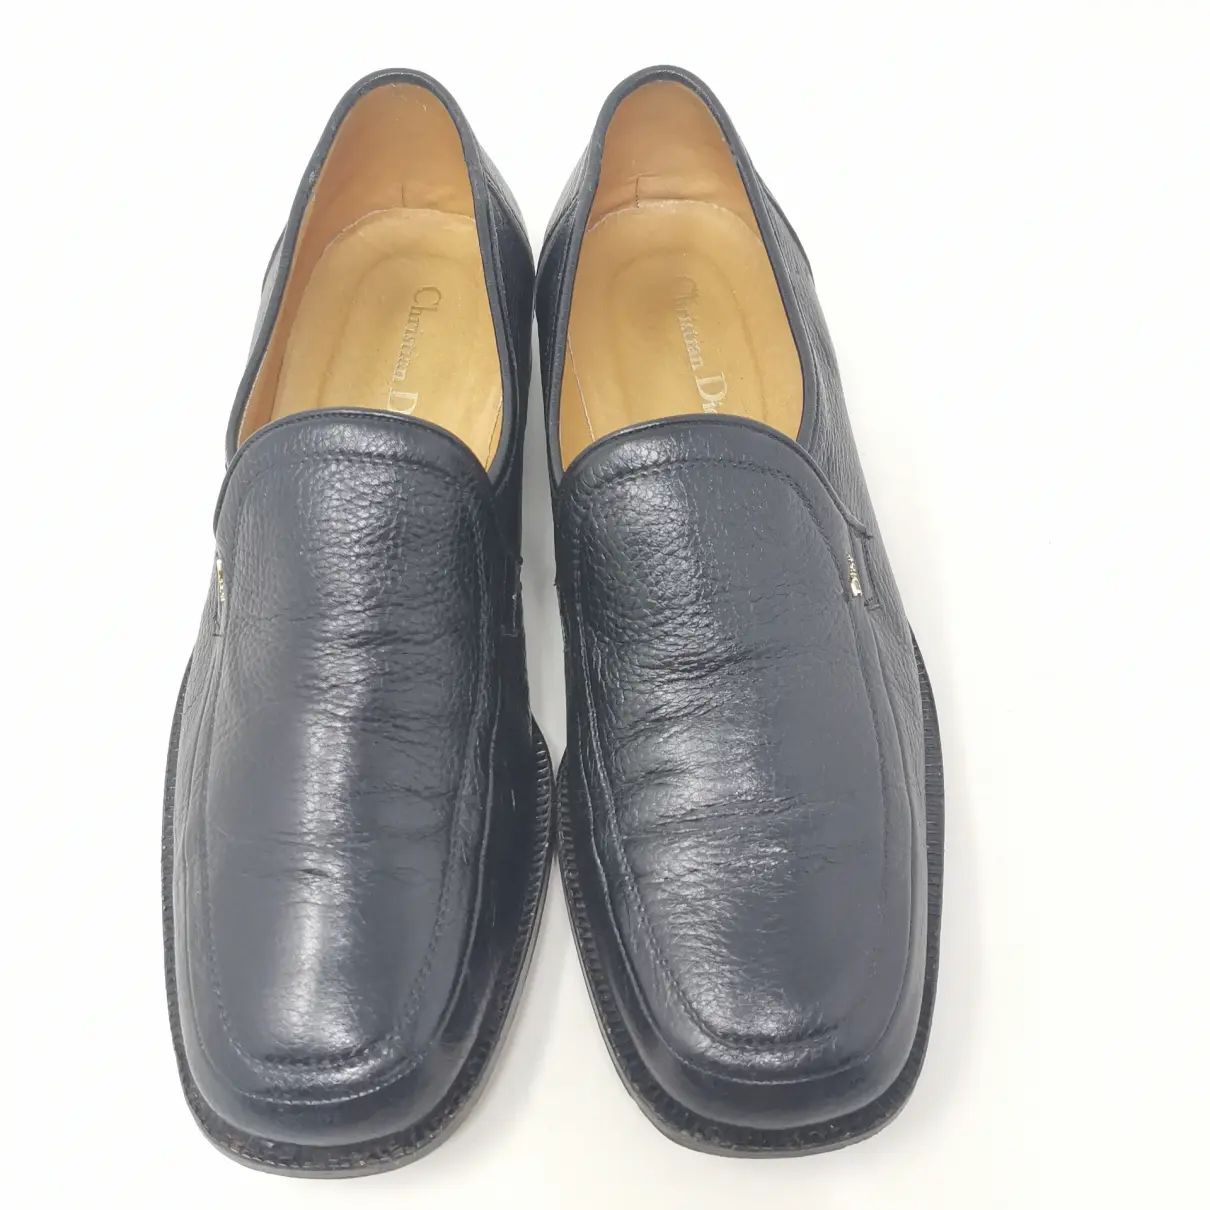 Buy Dior Homme Leather flats online